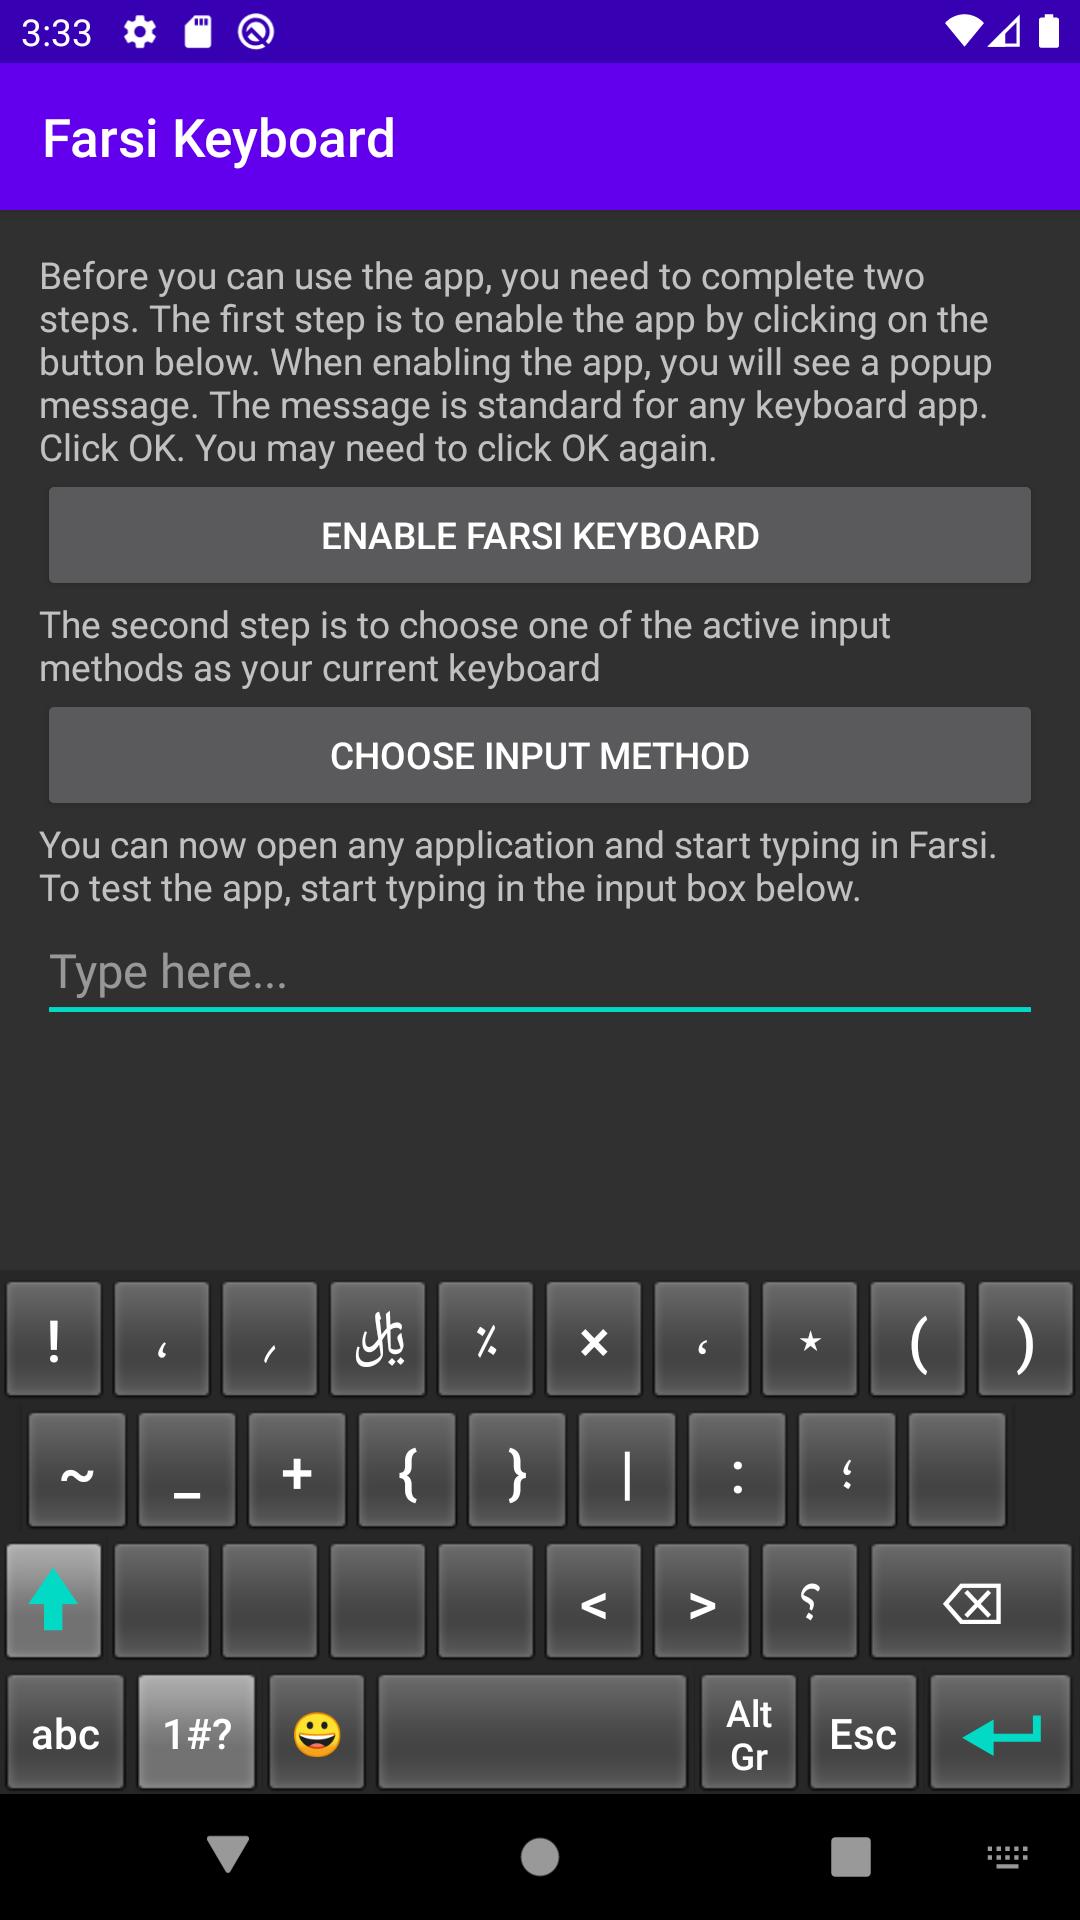 Farsi Keyboard for Android - APK Download